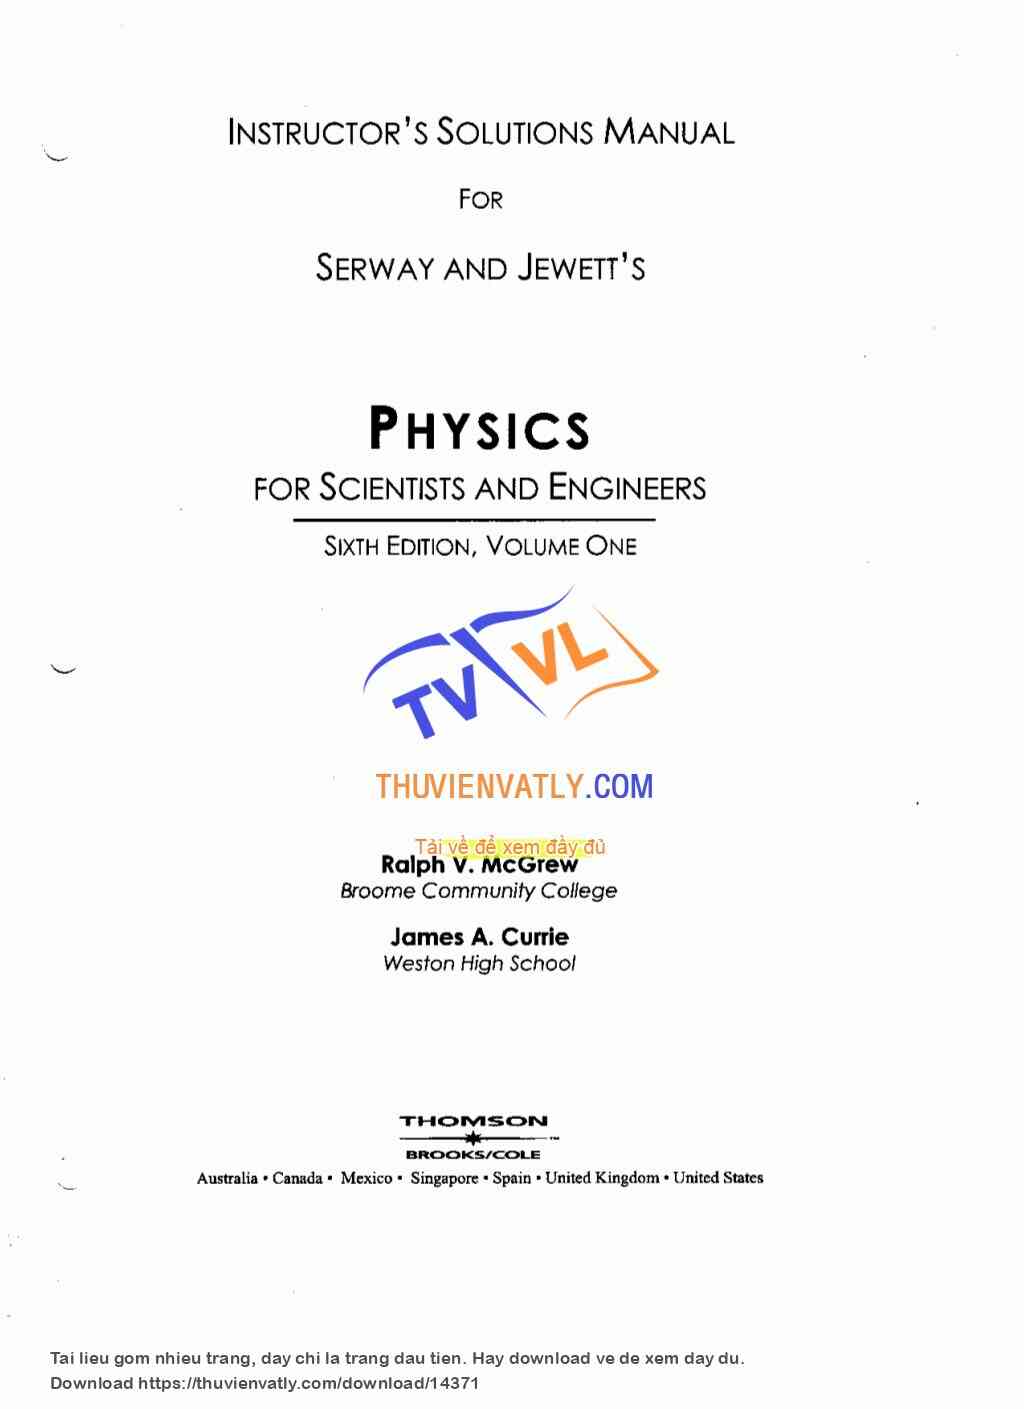 Physics for Scientists and Engineers 6E By Serway and Jewett - Solutions Manual Vol 1